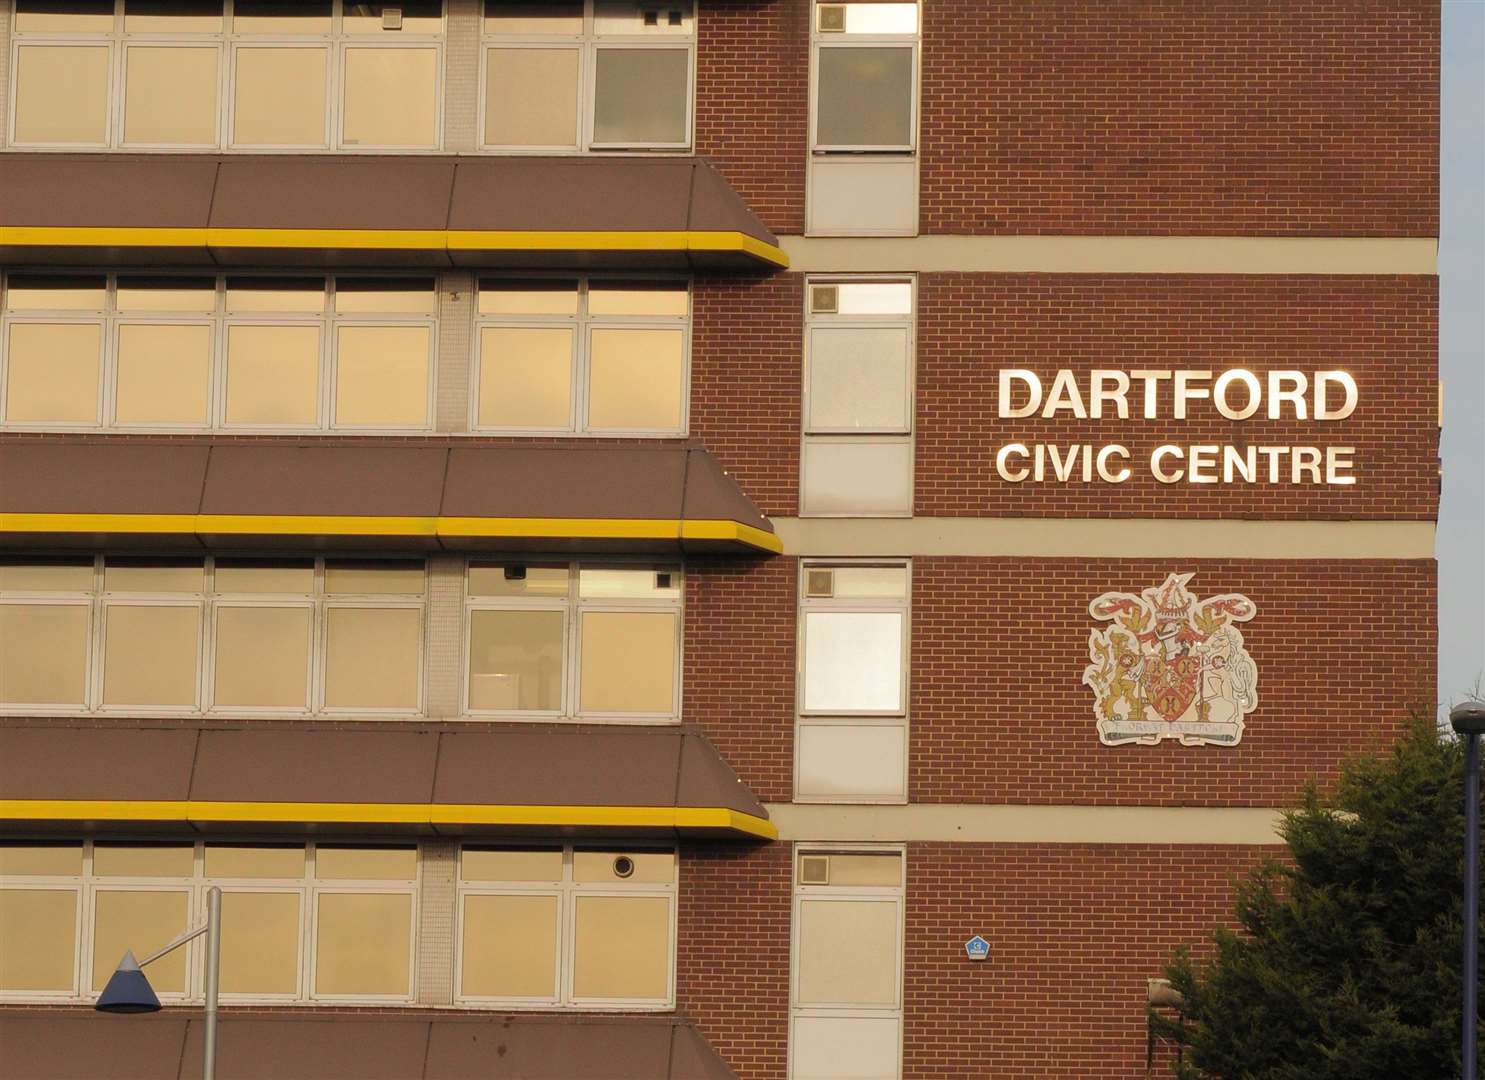 The site had previously been owned by Dartford council